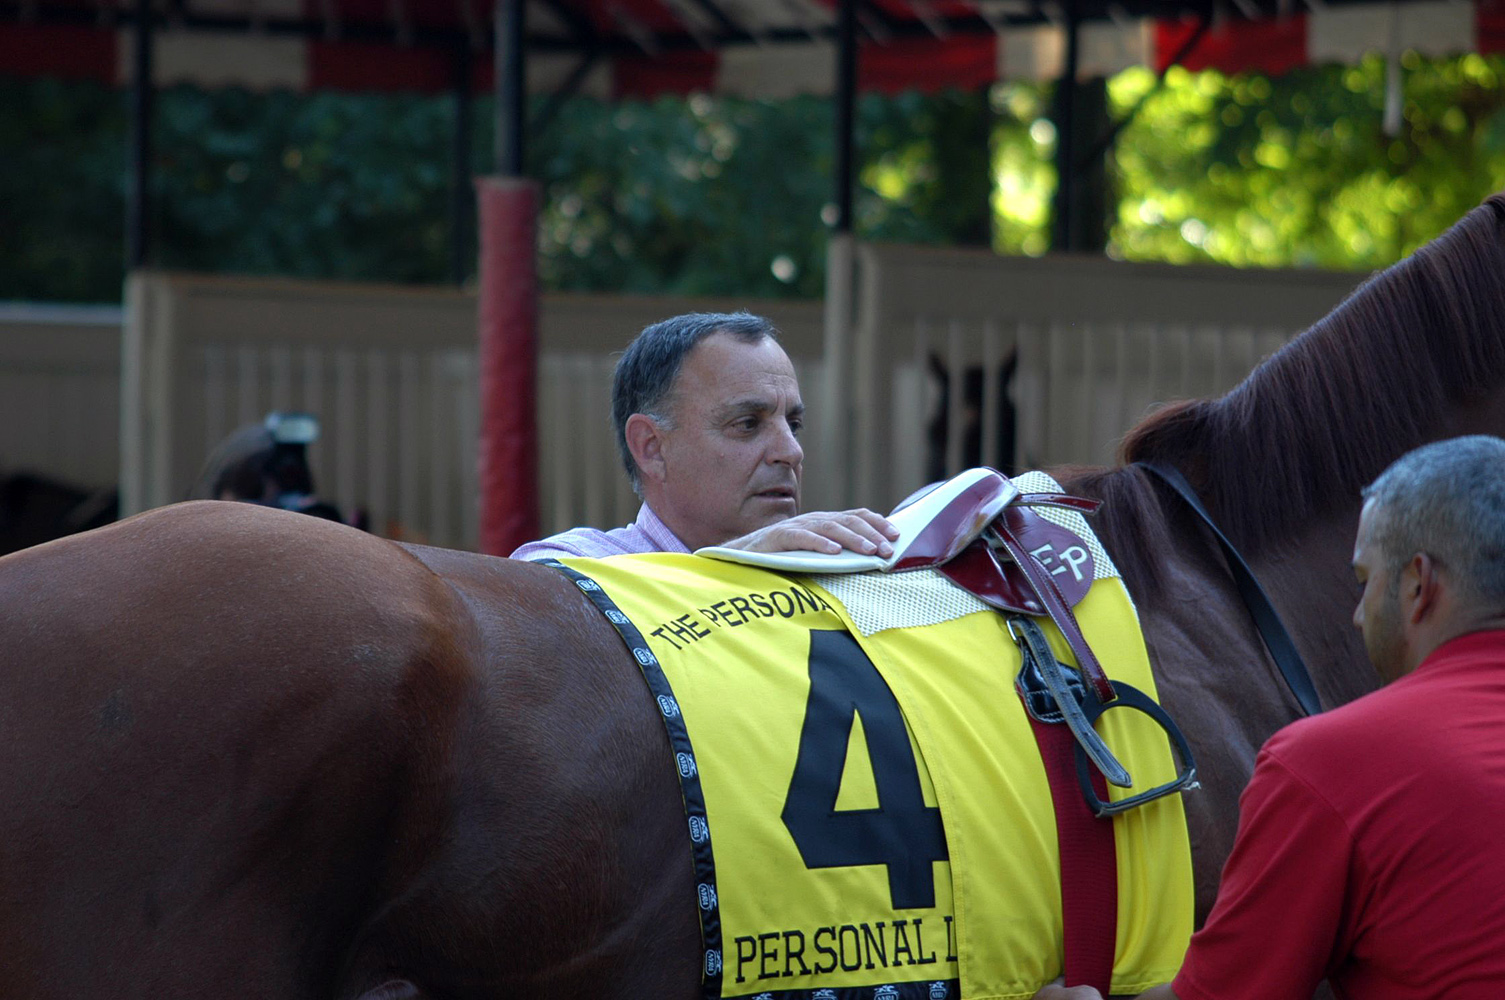 Bobby Frankel saddling in the Saratoga Paddock, August 2005 (Museum Collection)